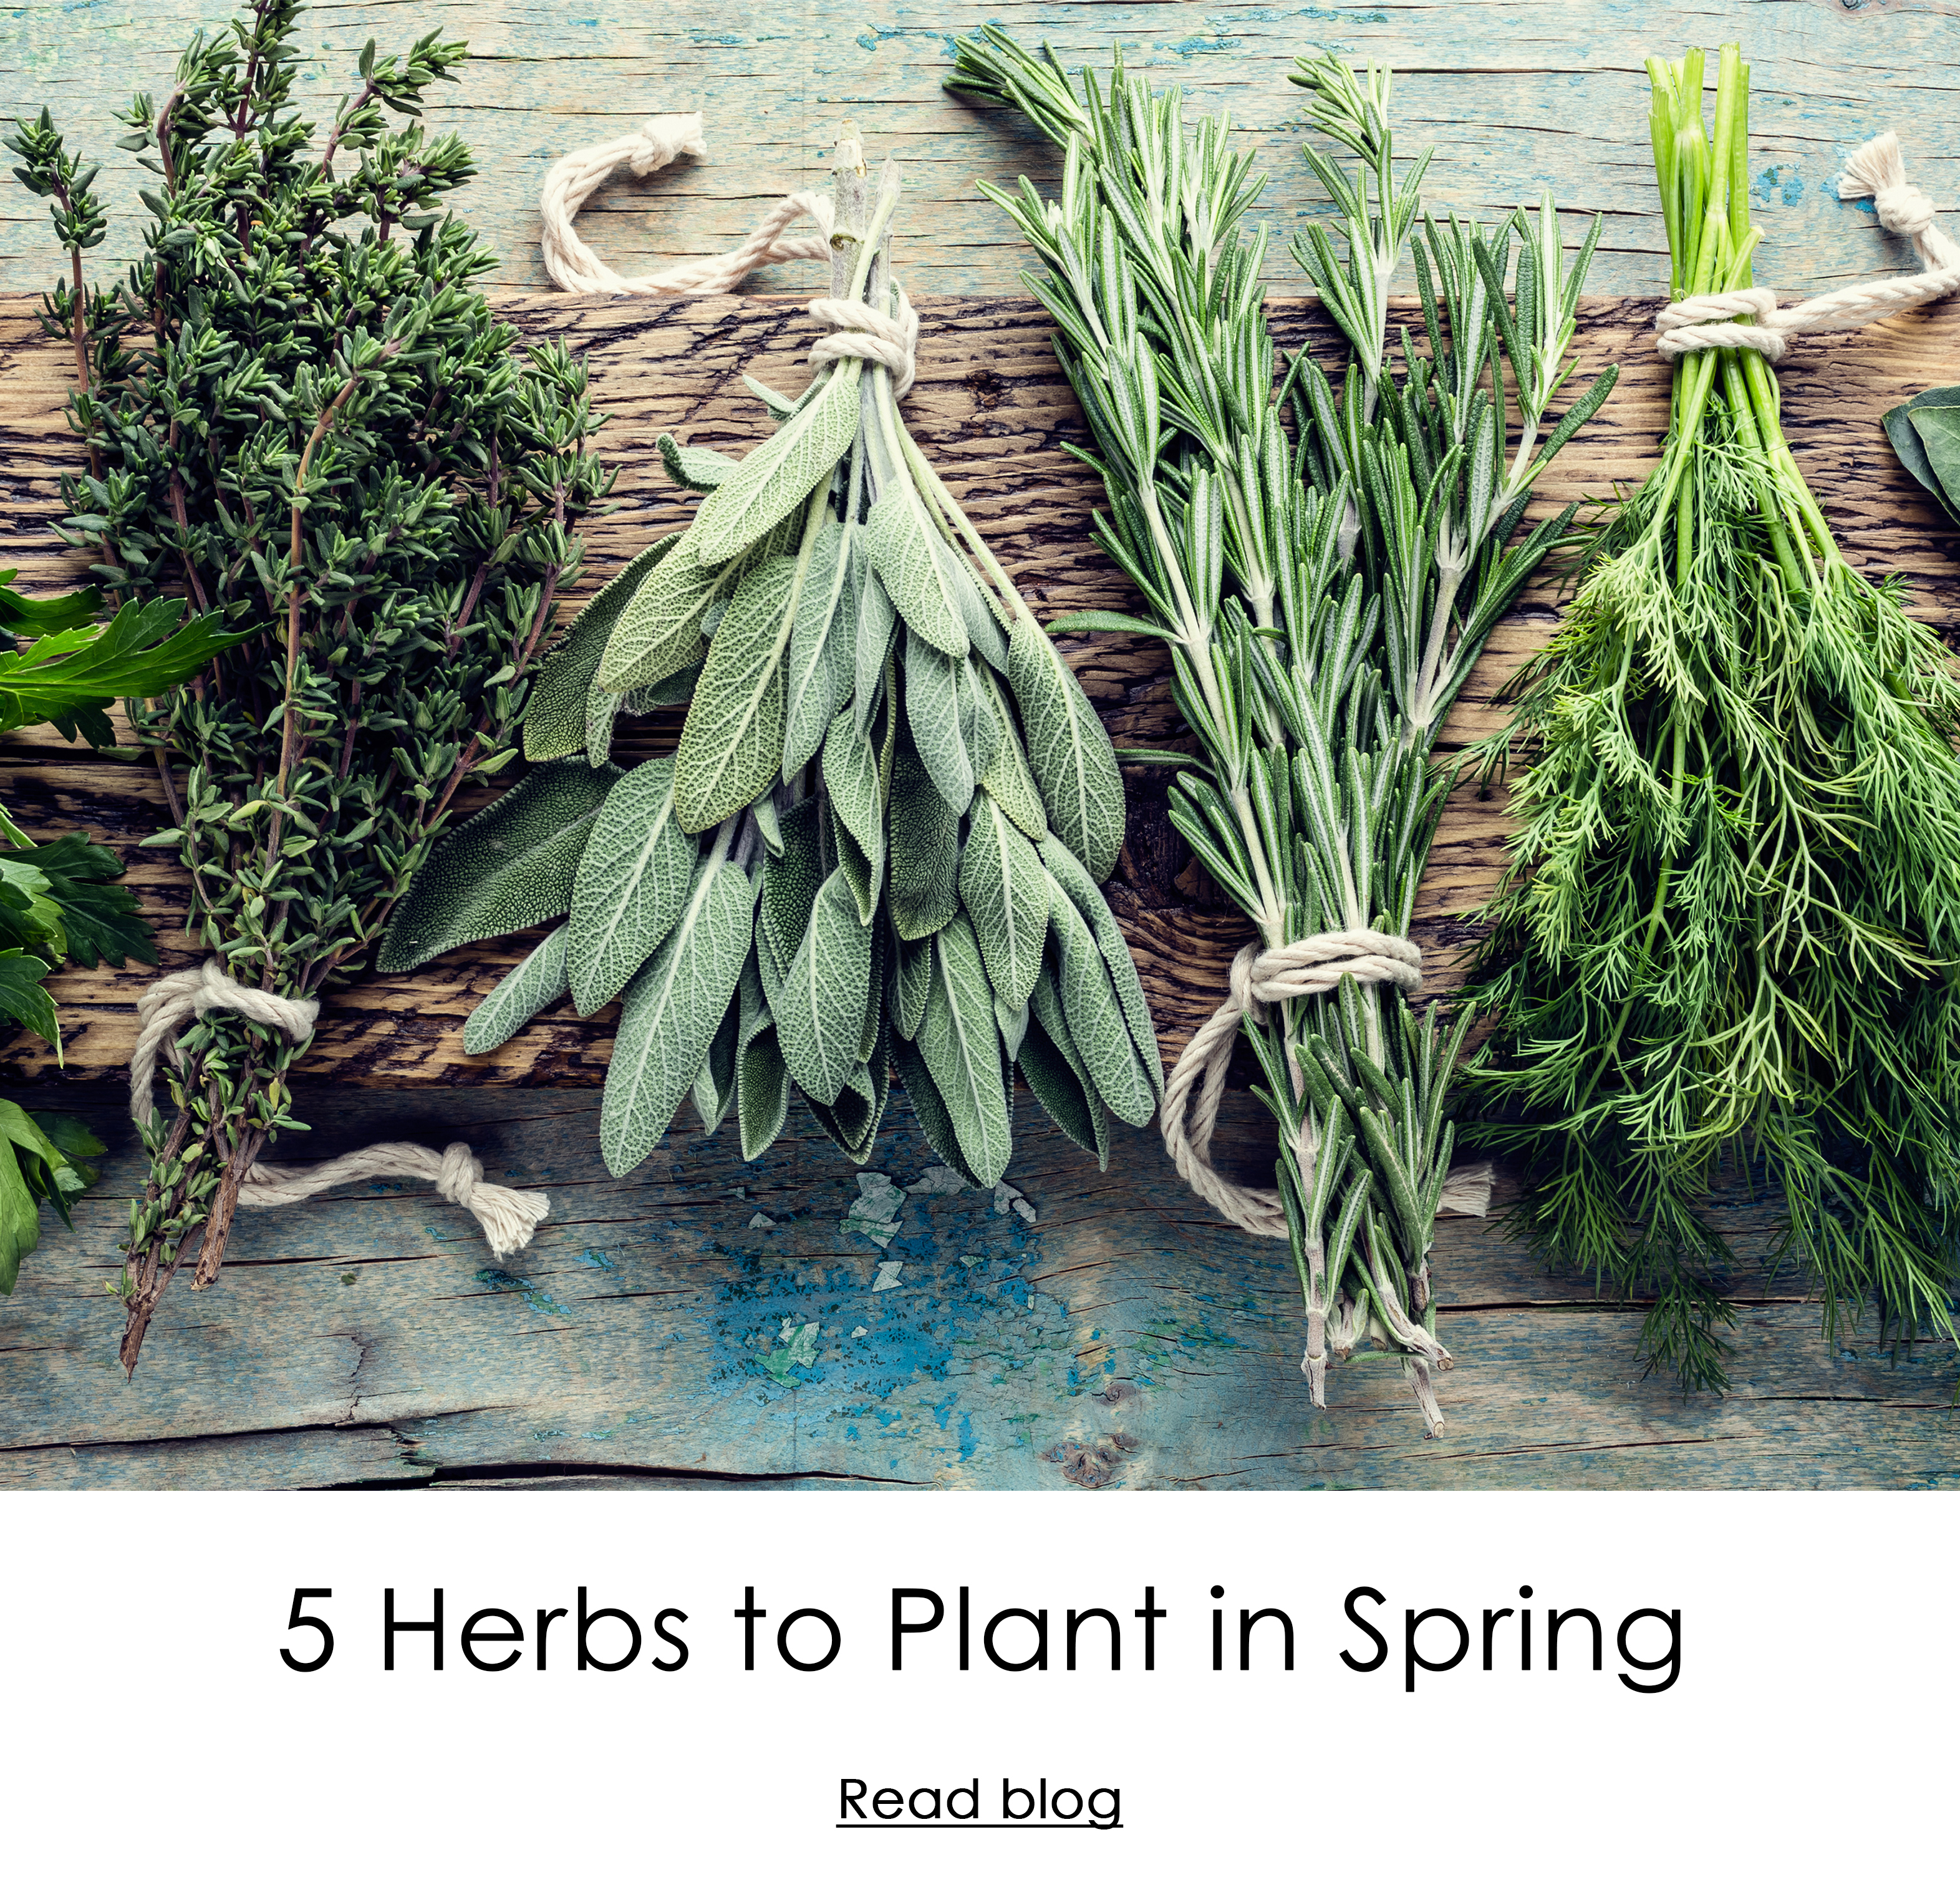 5 Herbs to Plant in Spring